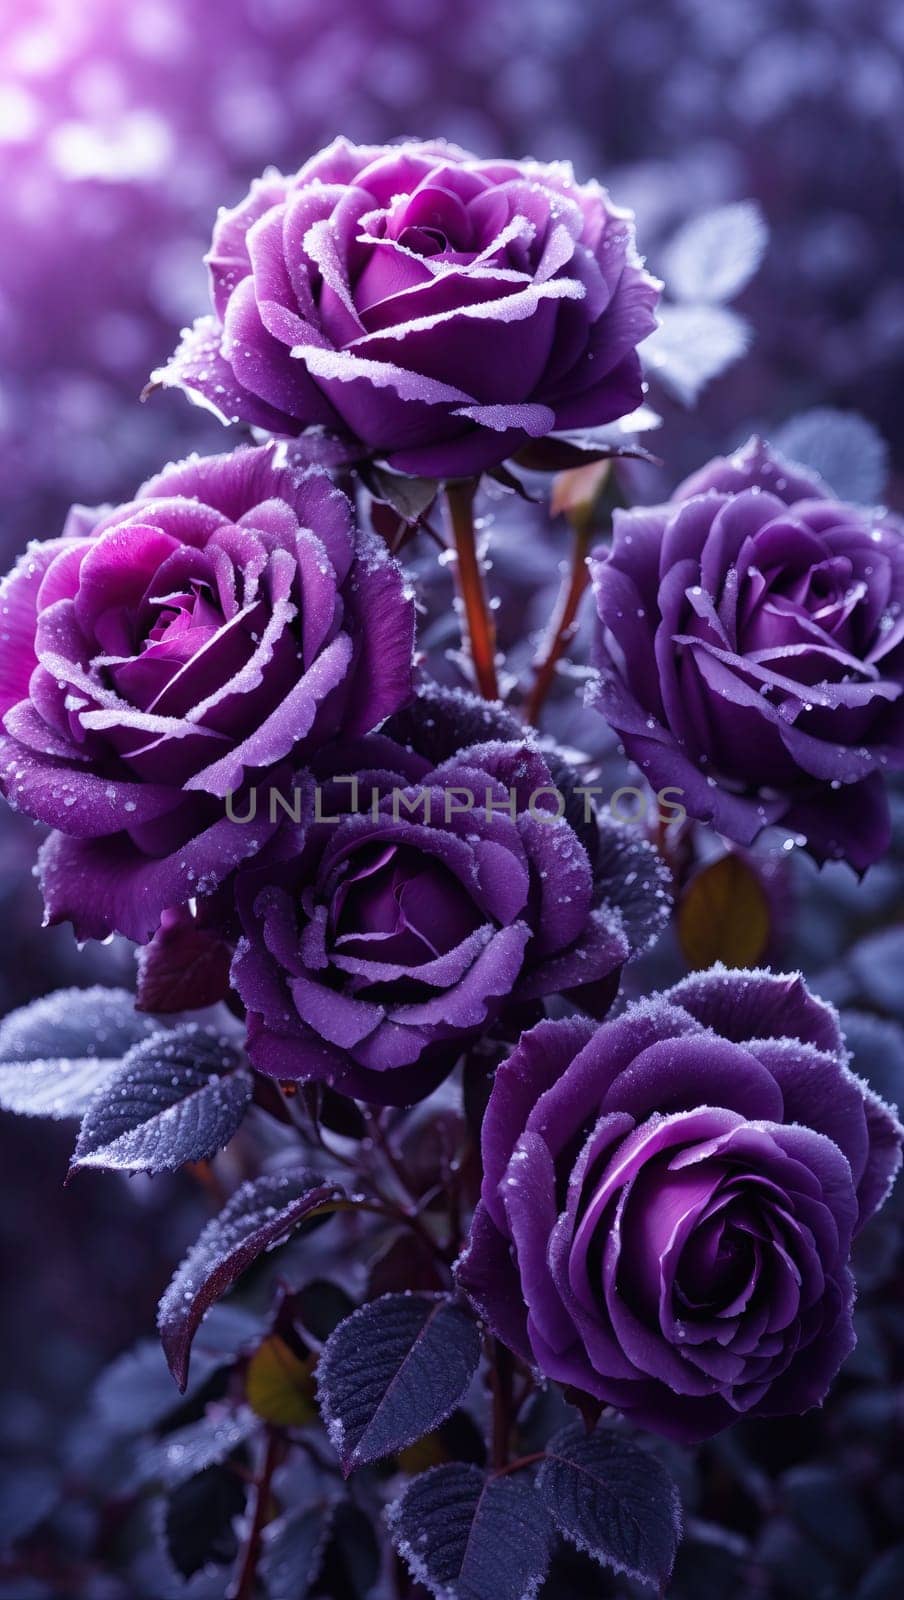 Frozen purple roses, Real photo by applesstock